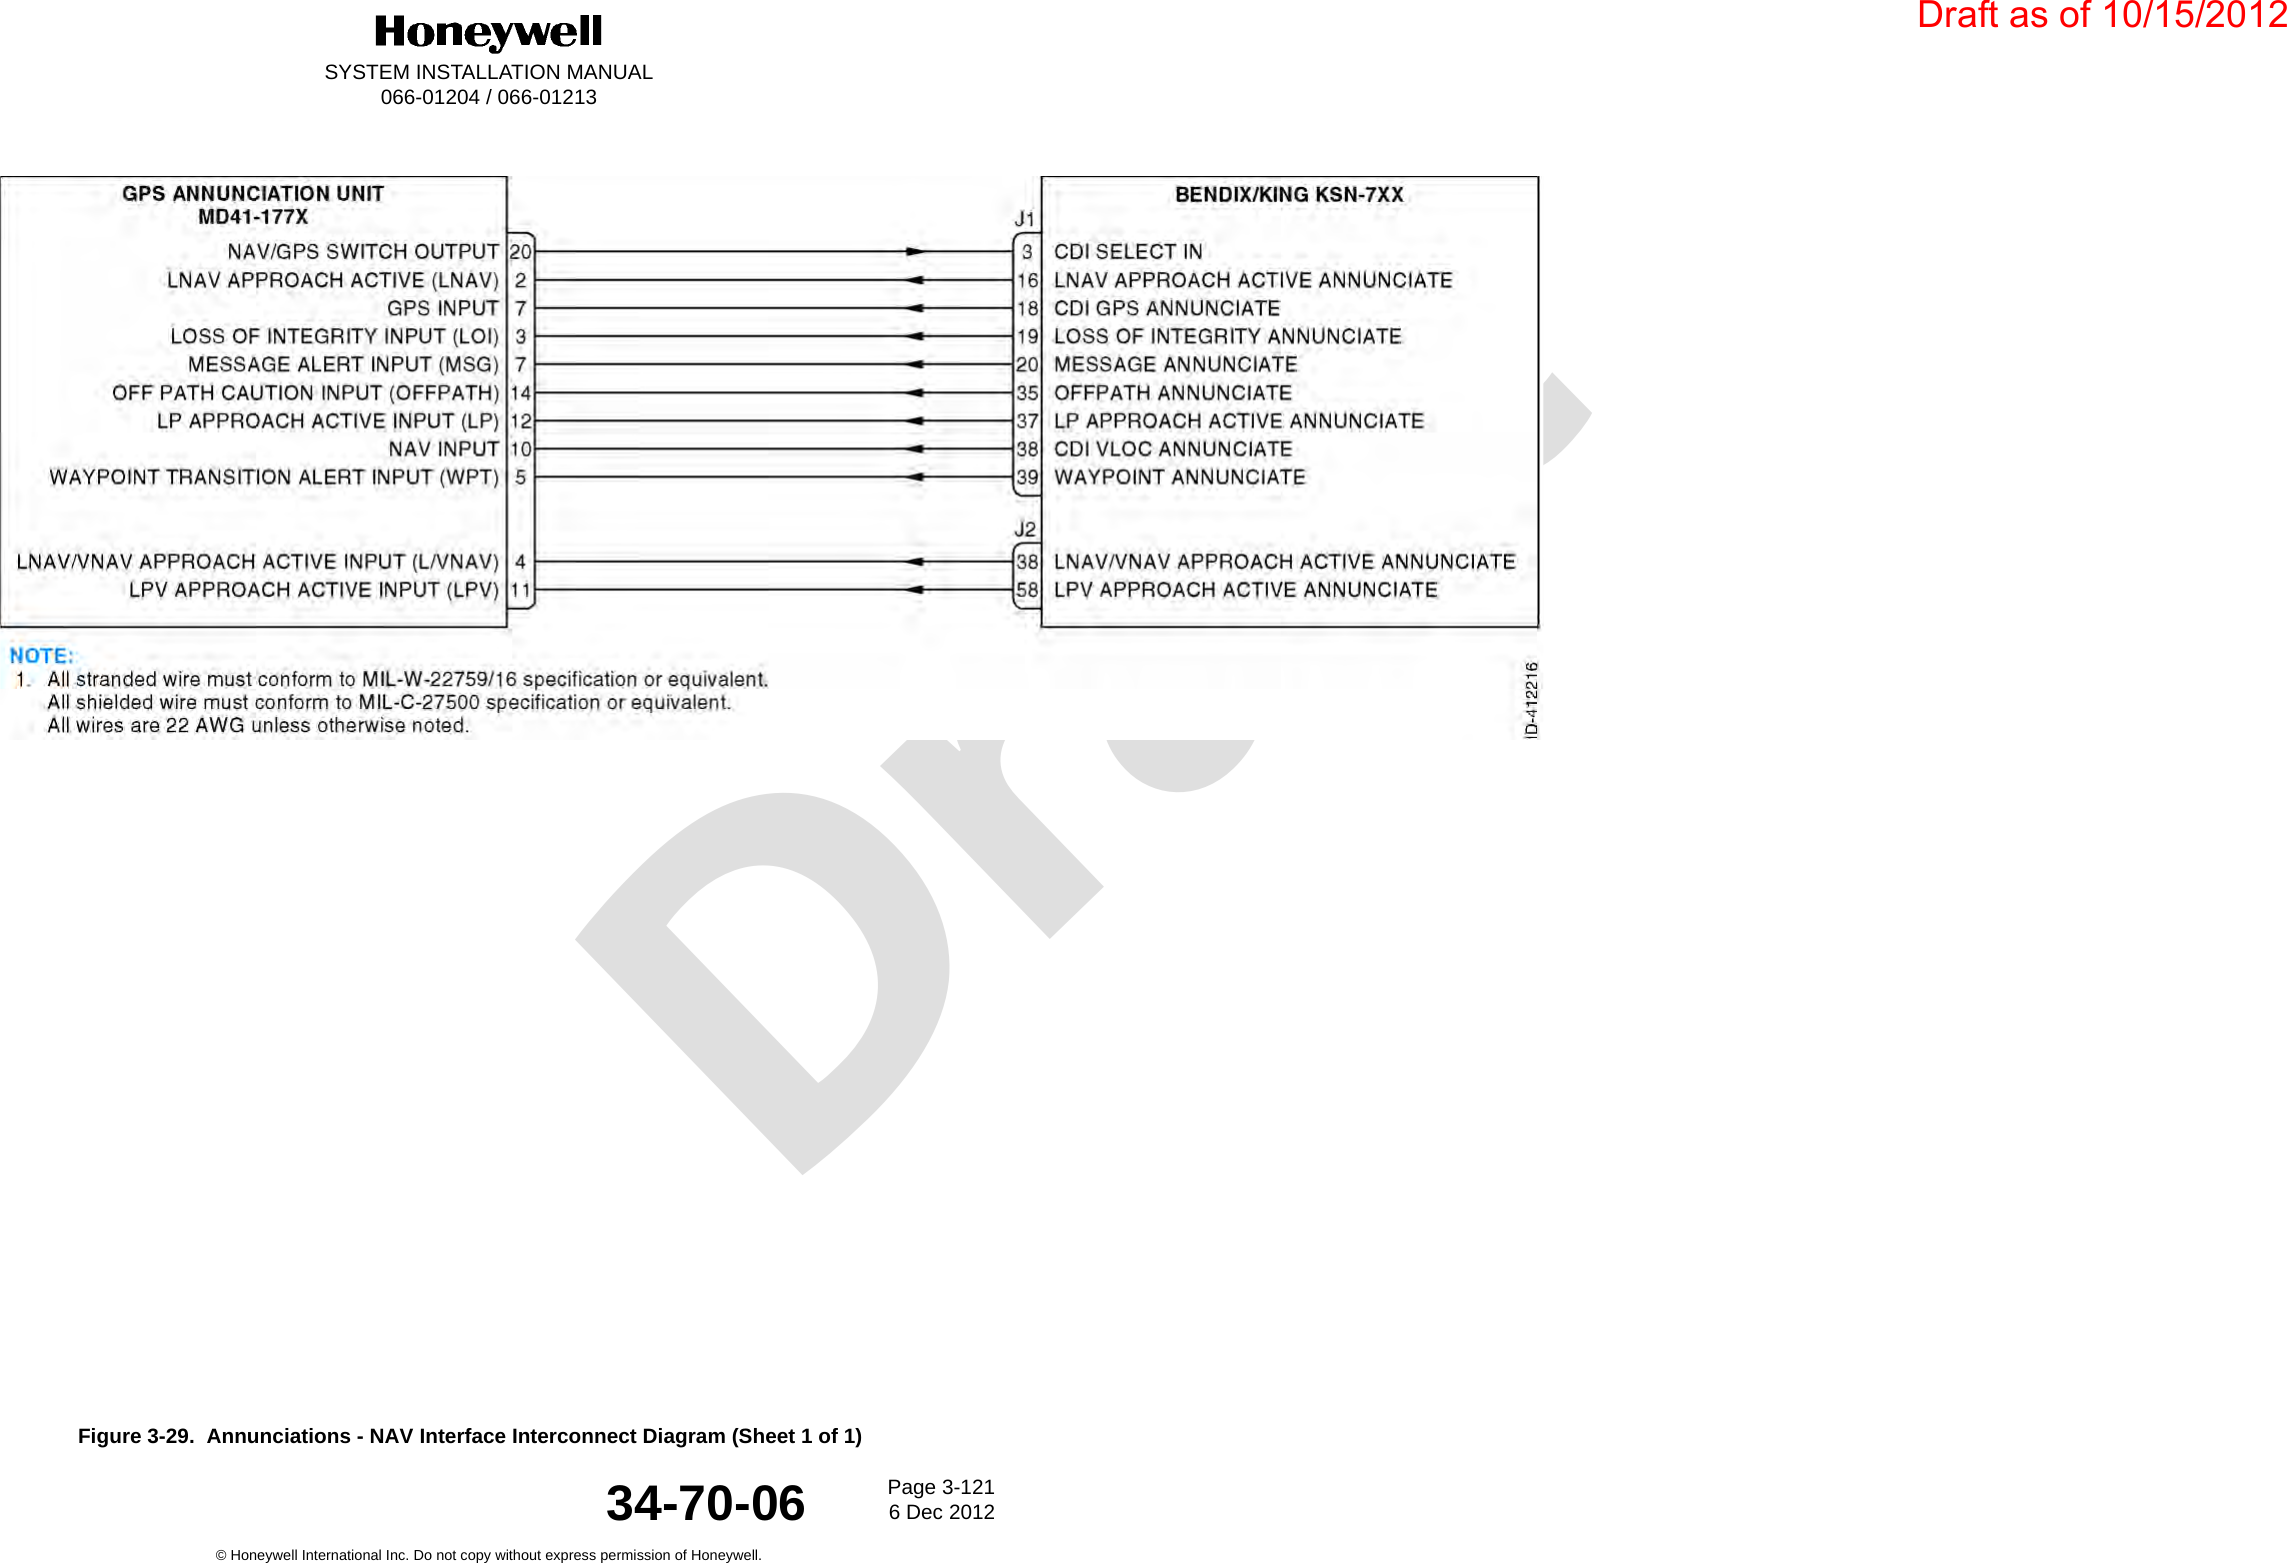 DraftSYSTEM INSTALLATION MANUAL066-01204 / 066-01213Page 3-1216 Dec 2012© Honeywell International Inc. Do not copy without express permission of Honeywell.34-70-06Figure 3-29.  Annunciations - NAV Interface Interconnect Diagram (Sheet 1 of 1)Draft as of 10/15/2012